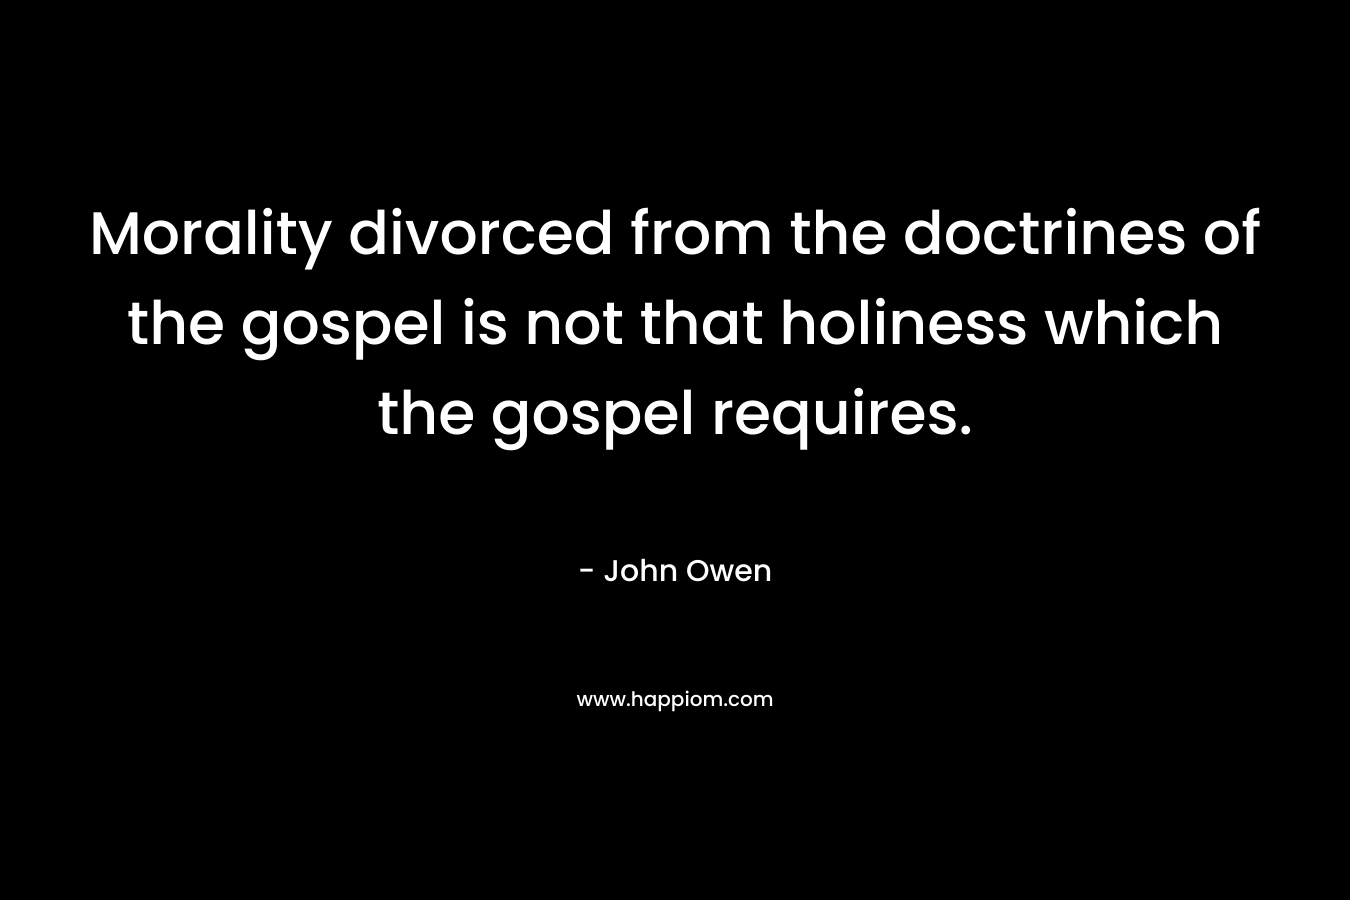 Morality divorced from the doctrines of the gospel is not that holiness which the gospel requires. – John Owen